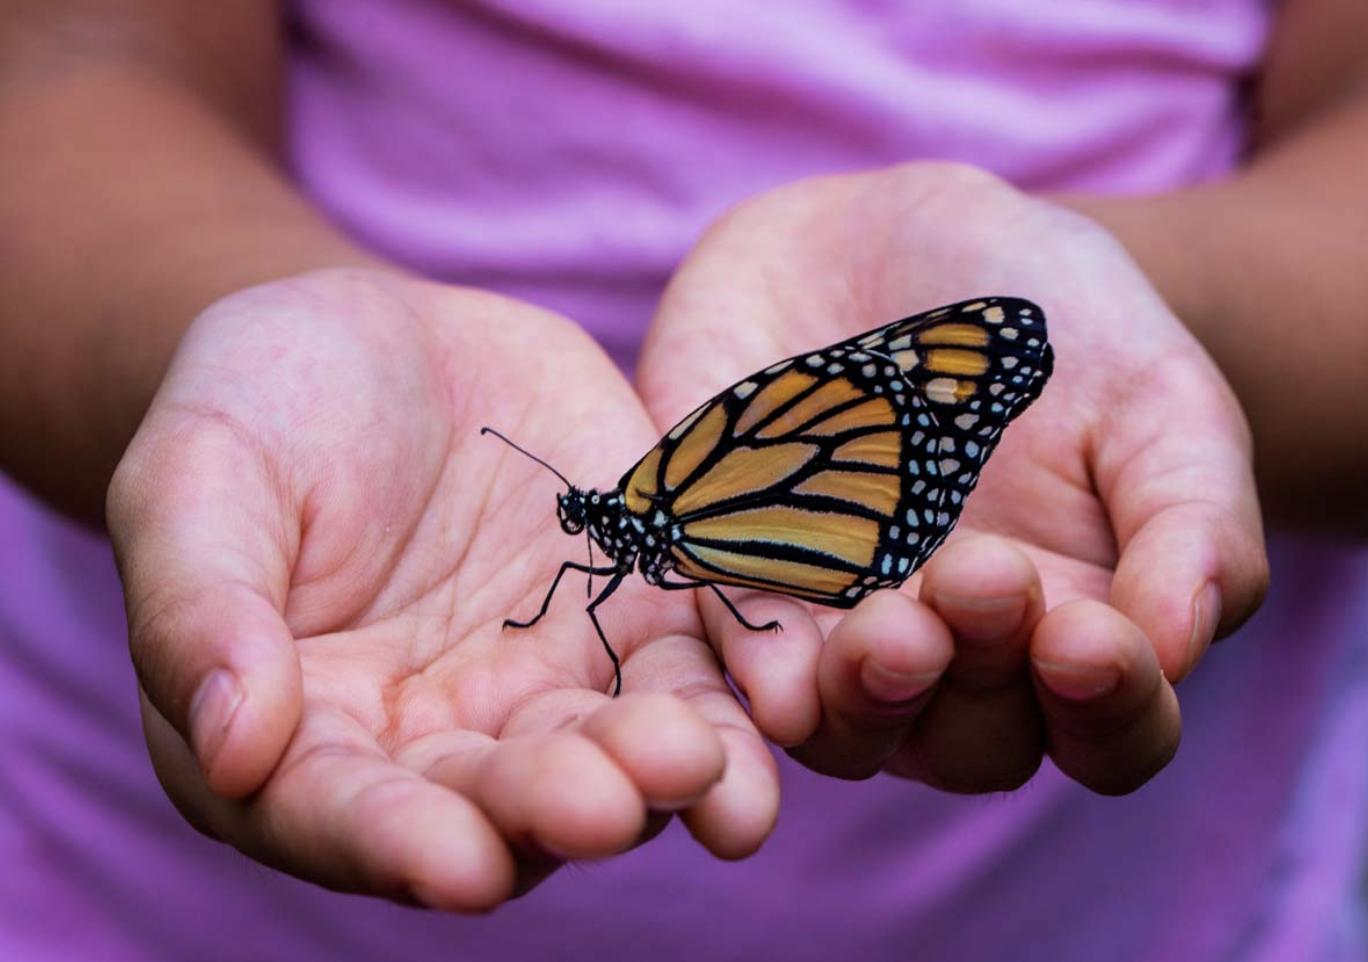 Small hands holding butterfly